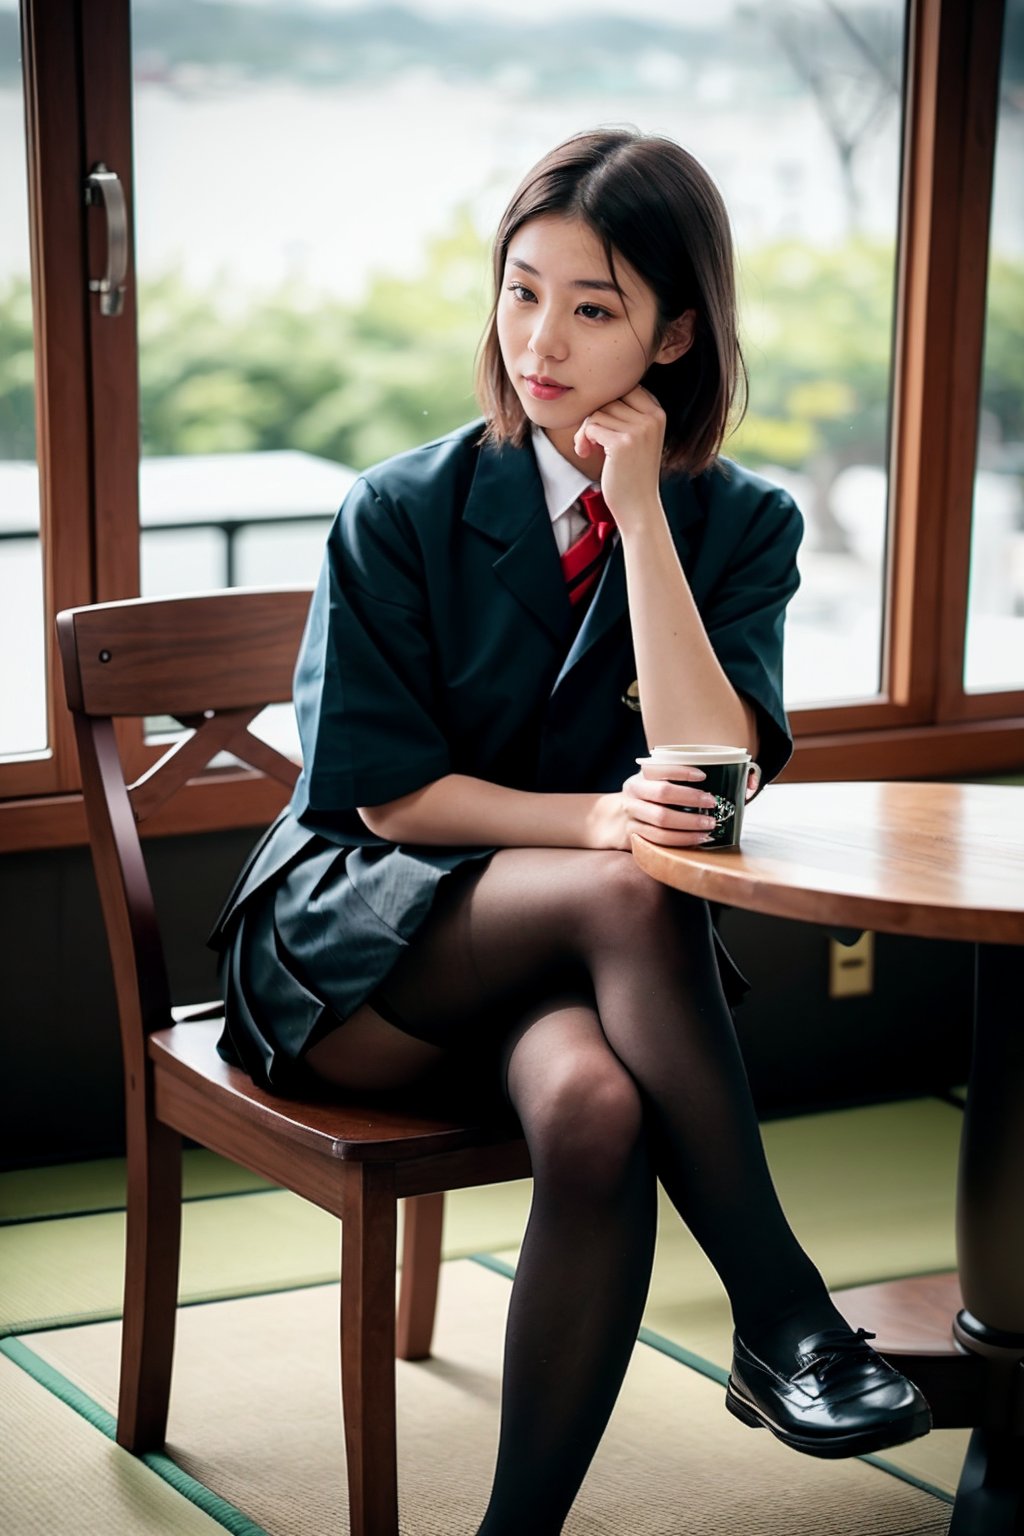 1 girl , taiwanese,  20_years old ,Asia, senior hight school, D cup, {{short_hair the ends are cut around chin length}}, Sailor suit uniform, skirt, {{4K_quality}}, ((japanese_JK_uniform)), Extremely Realistic, smaller head,studentofMisery, Fujifilm_camera , Aperture _F1.4, XF56mmF1.4 ,full-body shot, Bokeh, IG: iwakura shiori, stockings,canvas shoes, seat on the chair, {{window next to starbucks}}, Backlight, sideways ,{{ silhouette}}, indoor only sun light,time is 3P.M.,  turning head to look like a camera, No light indoors, light only form windows,Hands on the table, one hand resting on the chin, coffee cup on the table, film_style, cross her legs, Zettai Ryōiki